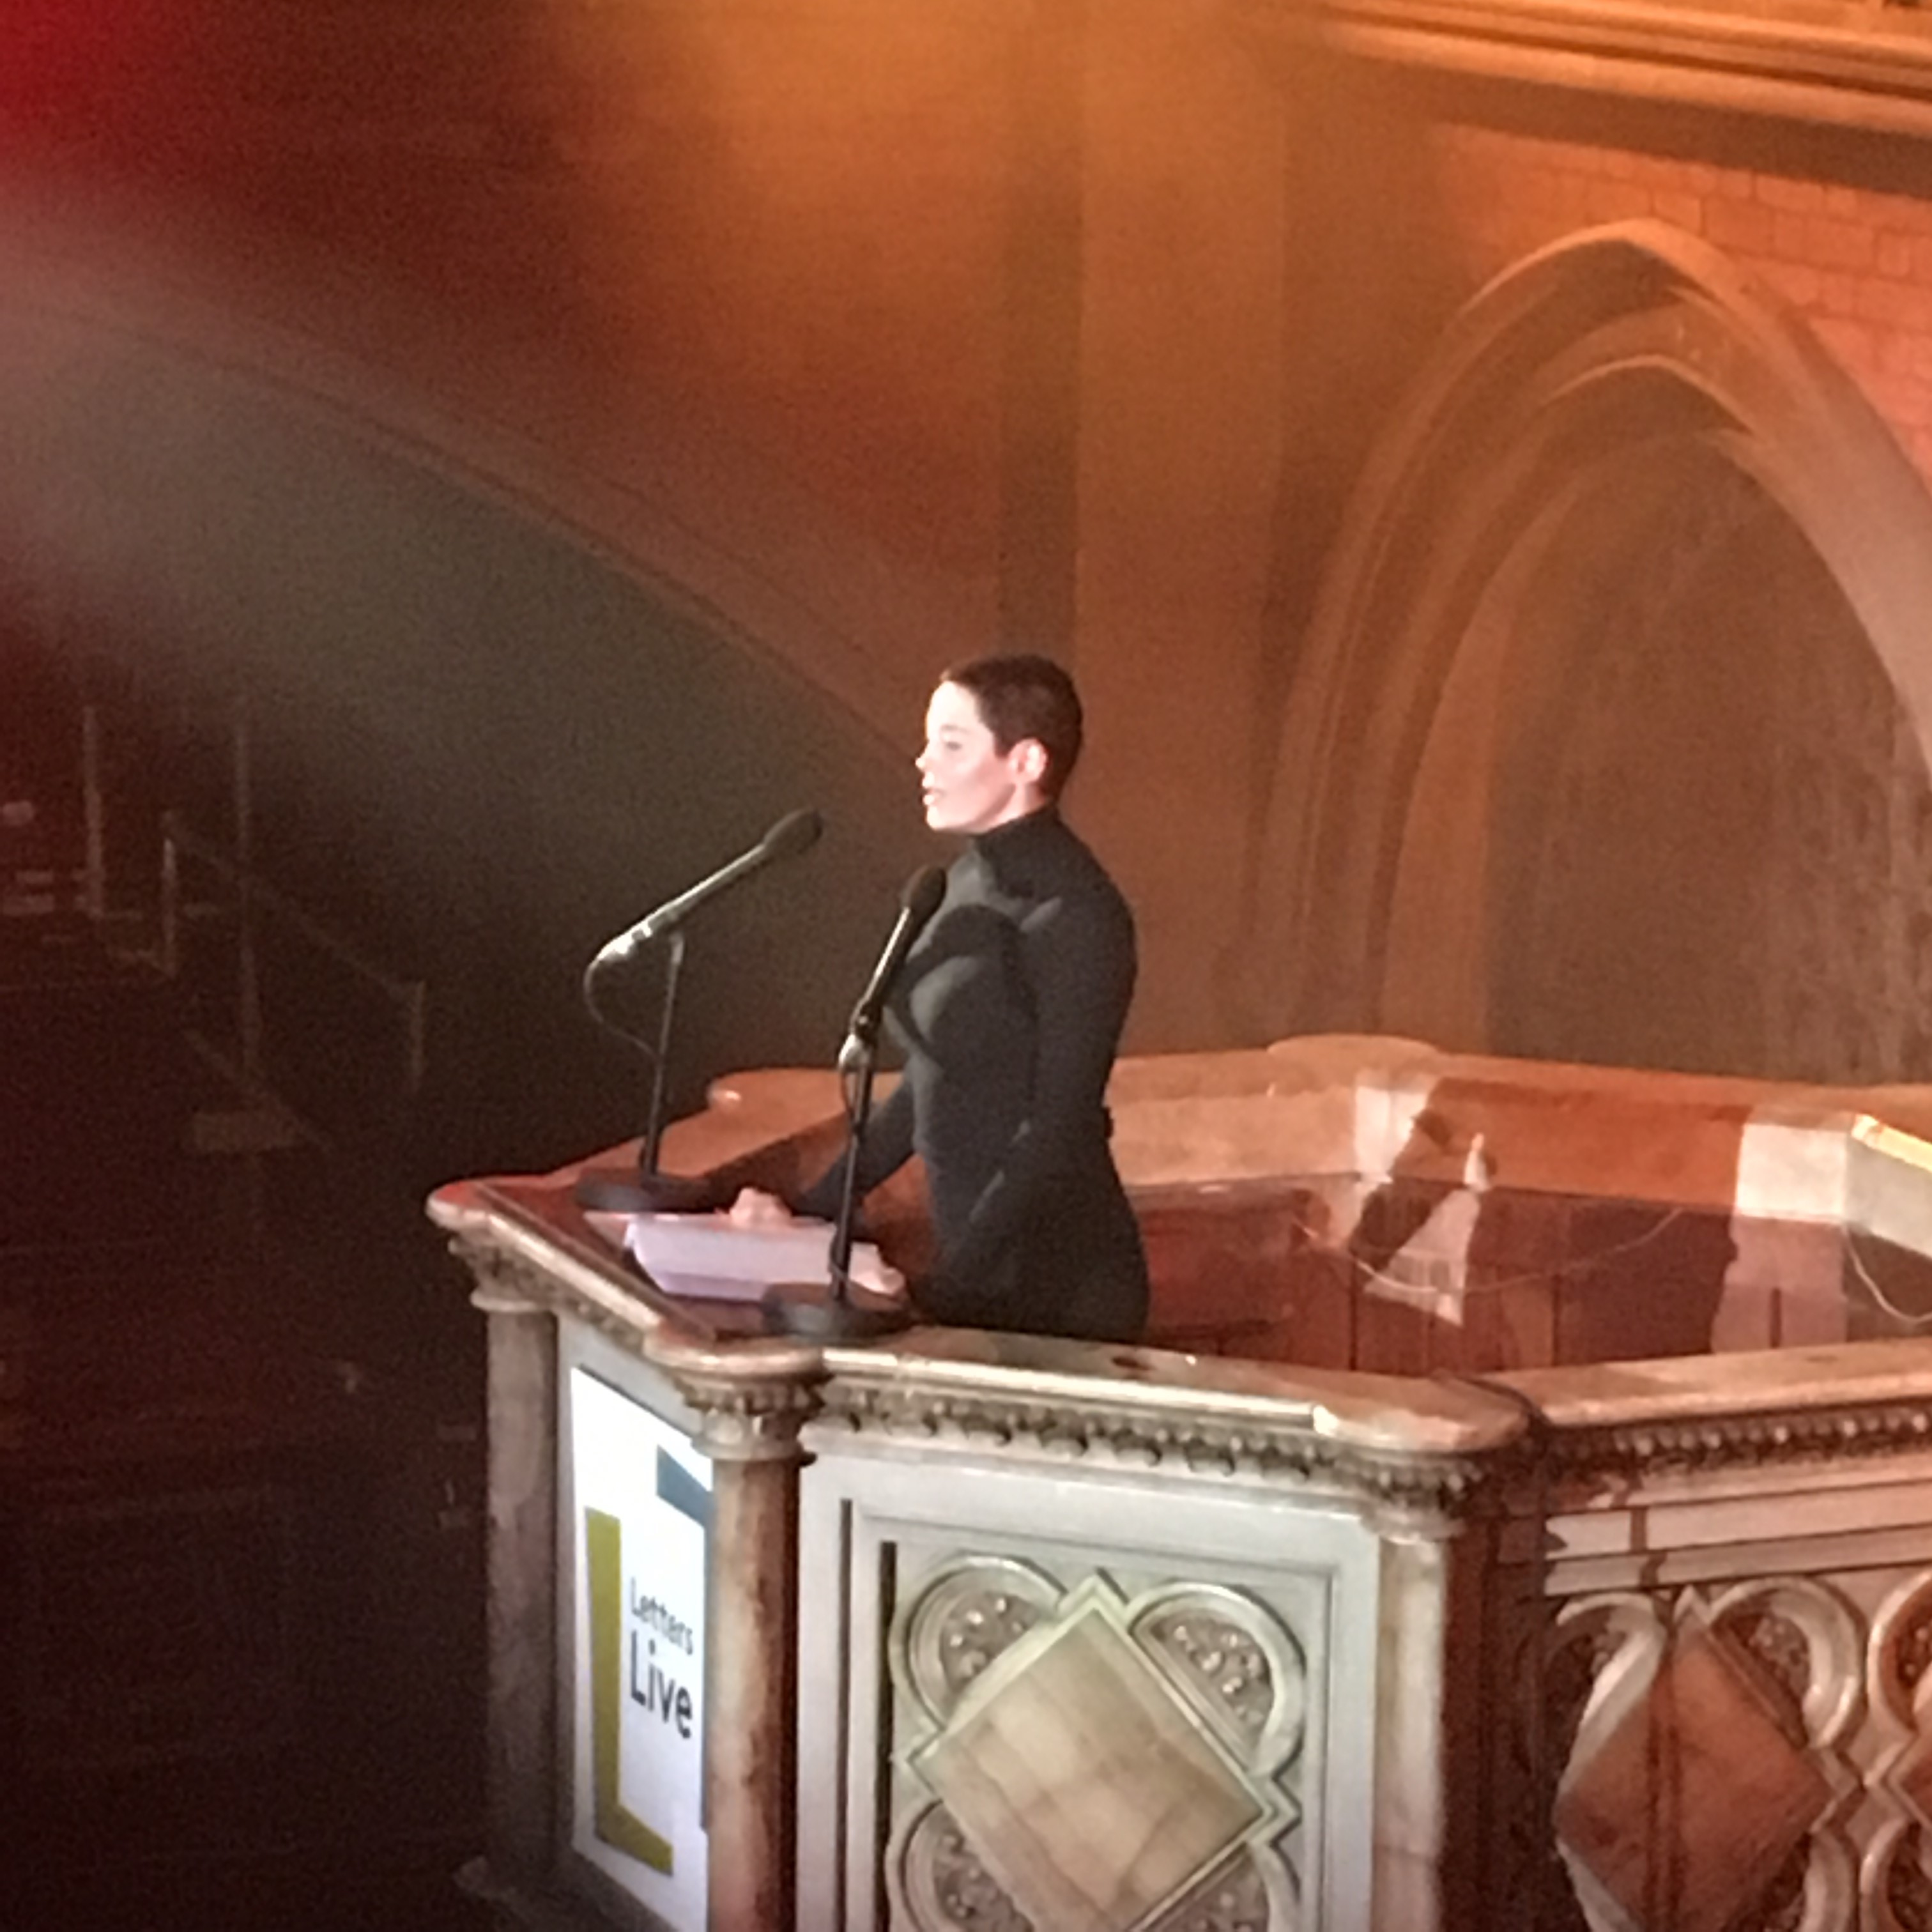 McGowan at the lectern of the Union Chapel 